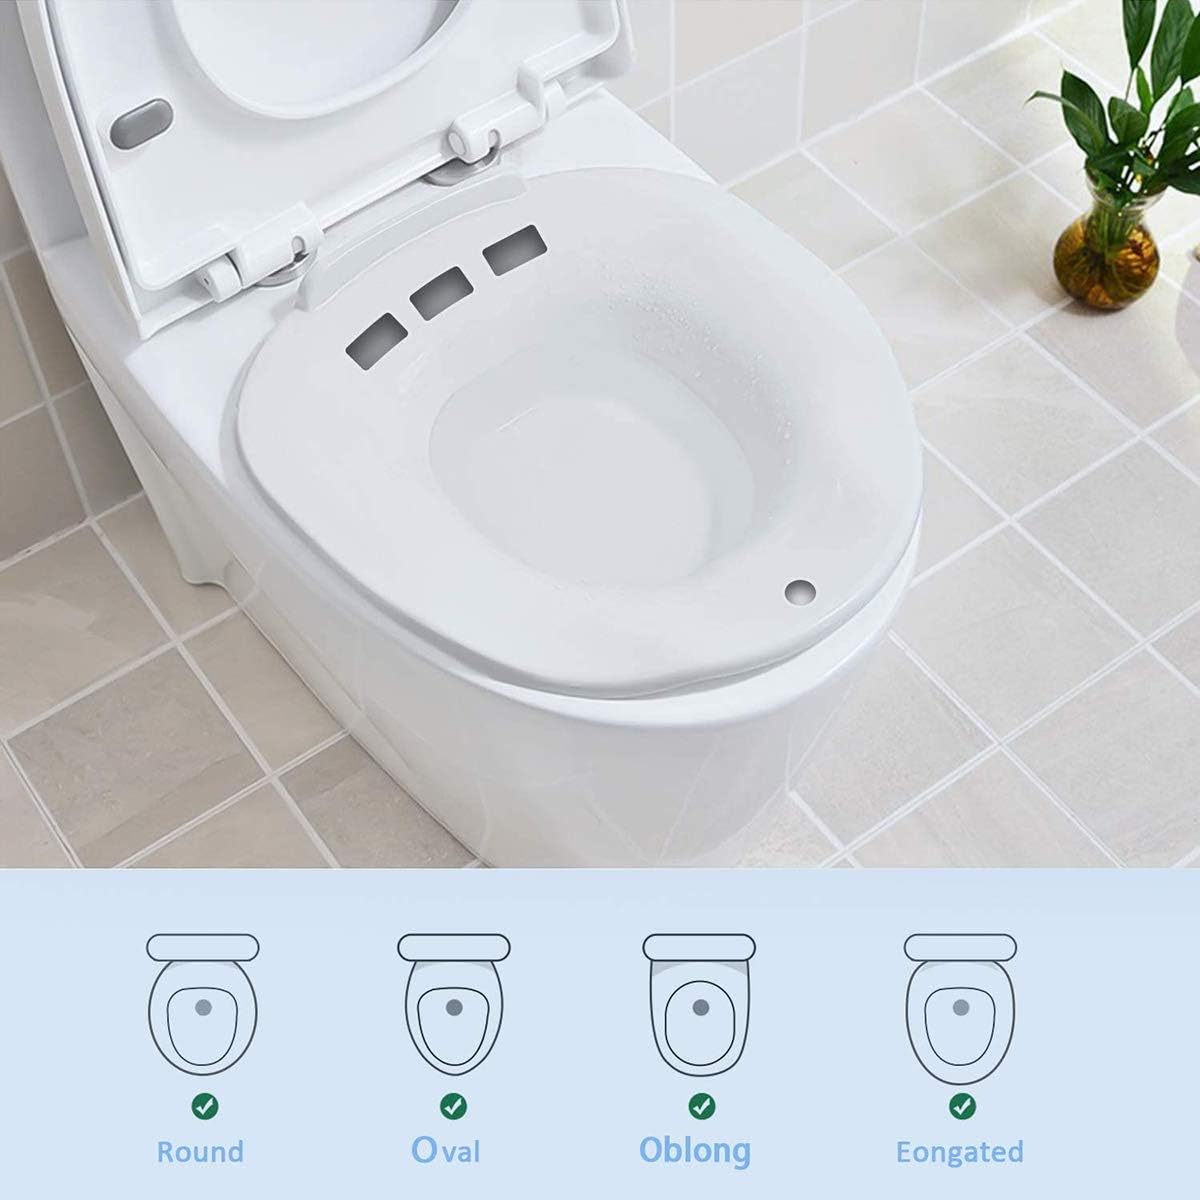 CharmCollection Sitz Bath for Over The Toilet Postpartum Care, Anal Postoperative Care Basin, for Hemorrhoids and Perineum Treatment, Alleviate Vaginal or Anal Inflammation, Foldable Easy to Store